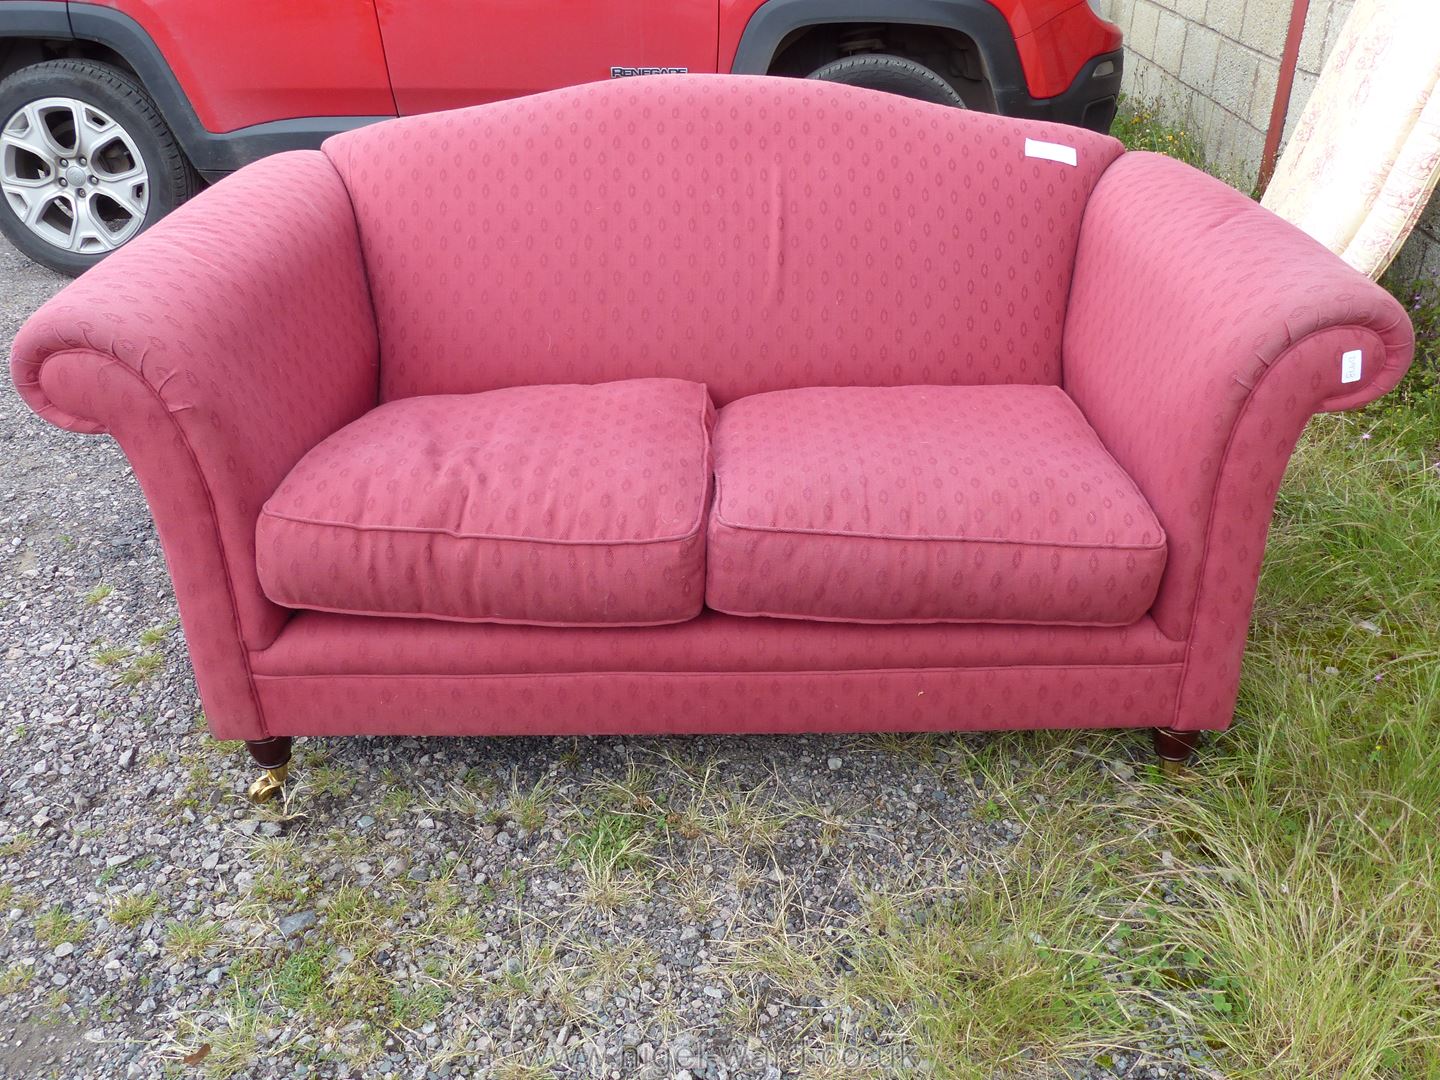 Laura Ashley two seater sofa and cushions.